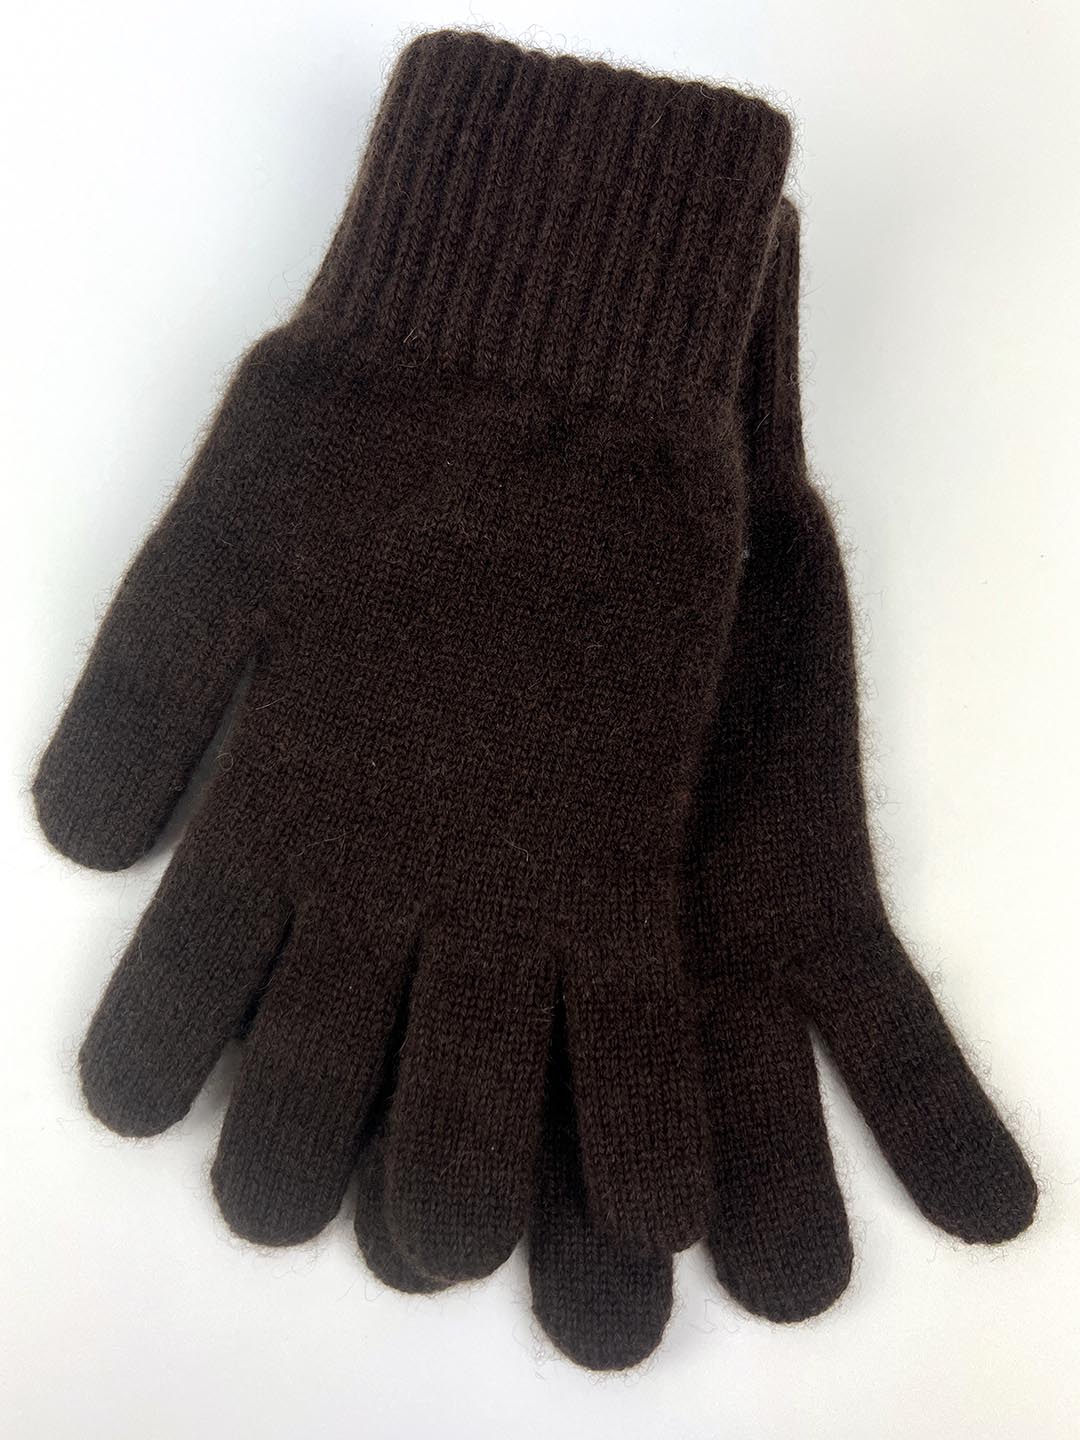 cashmere gloves in shade of brown